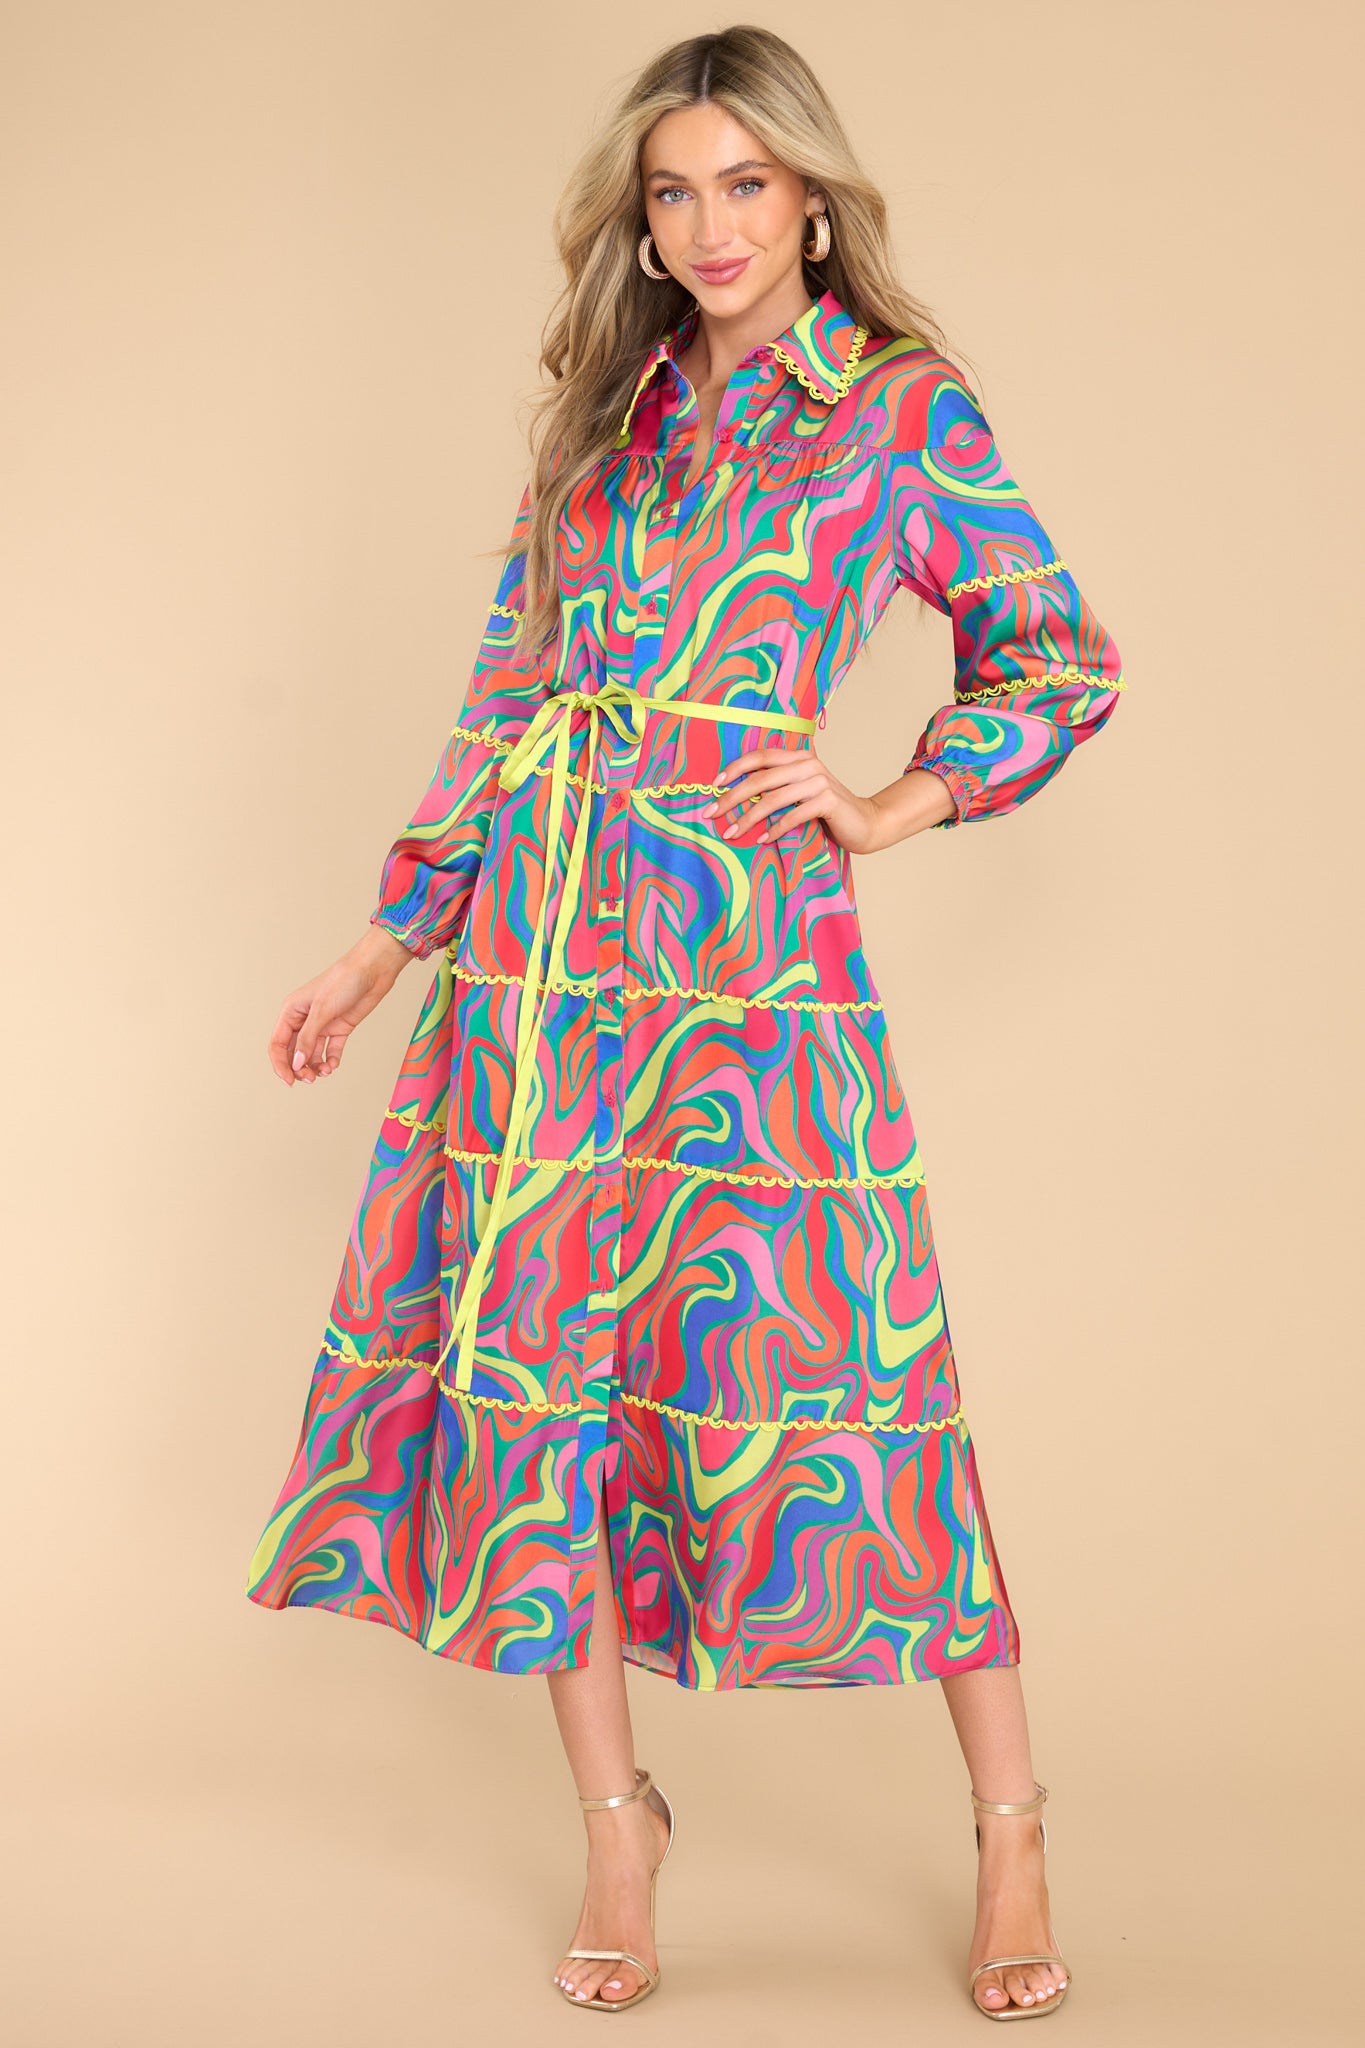 This shot showcases a marbled pattern in the colors pink, orange, yellow, green, blue, and purple with yellow accent trimming throughout the entire dress.